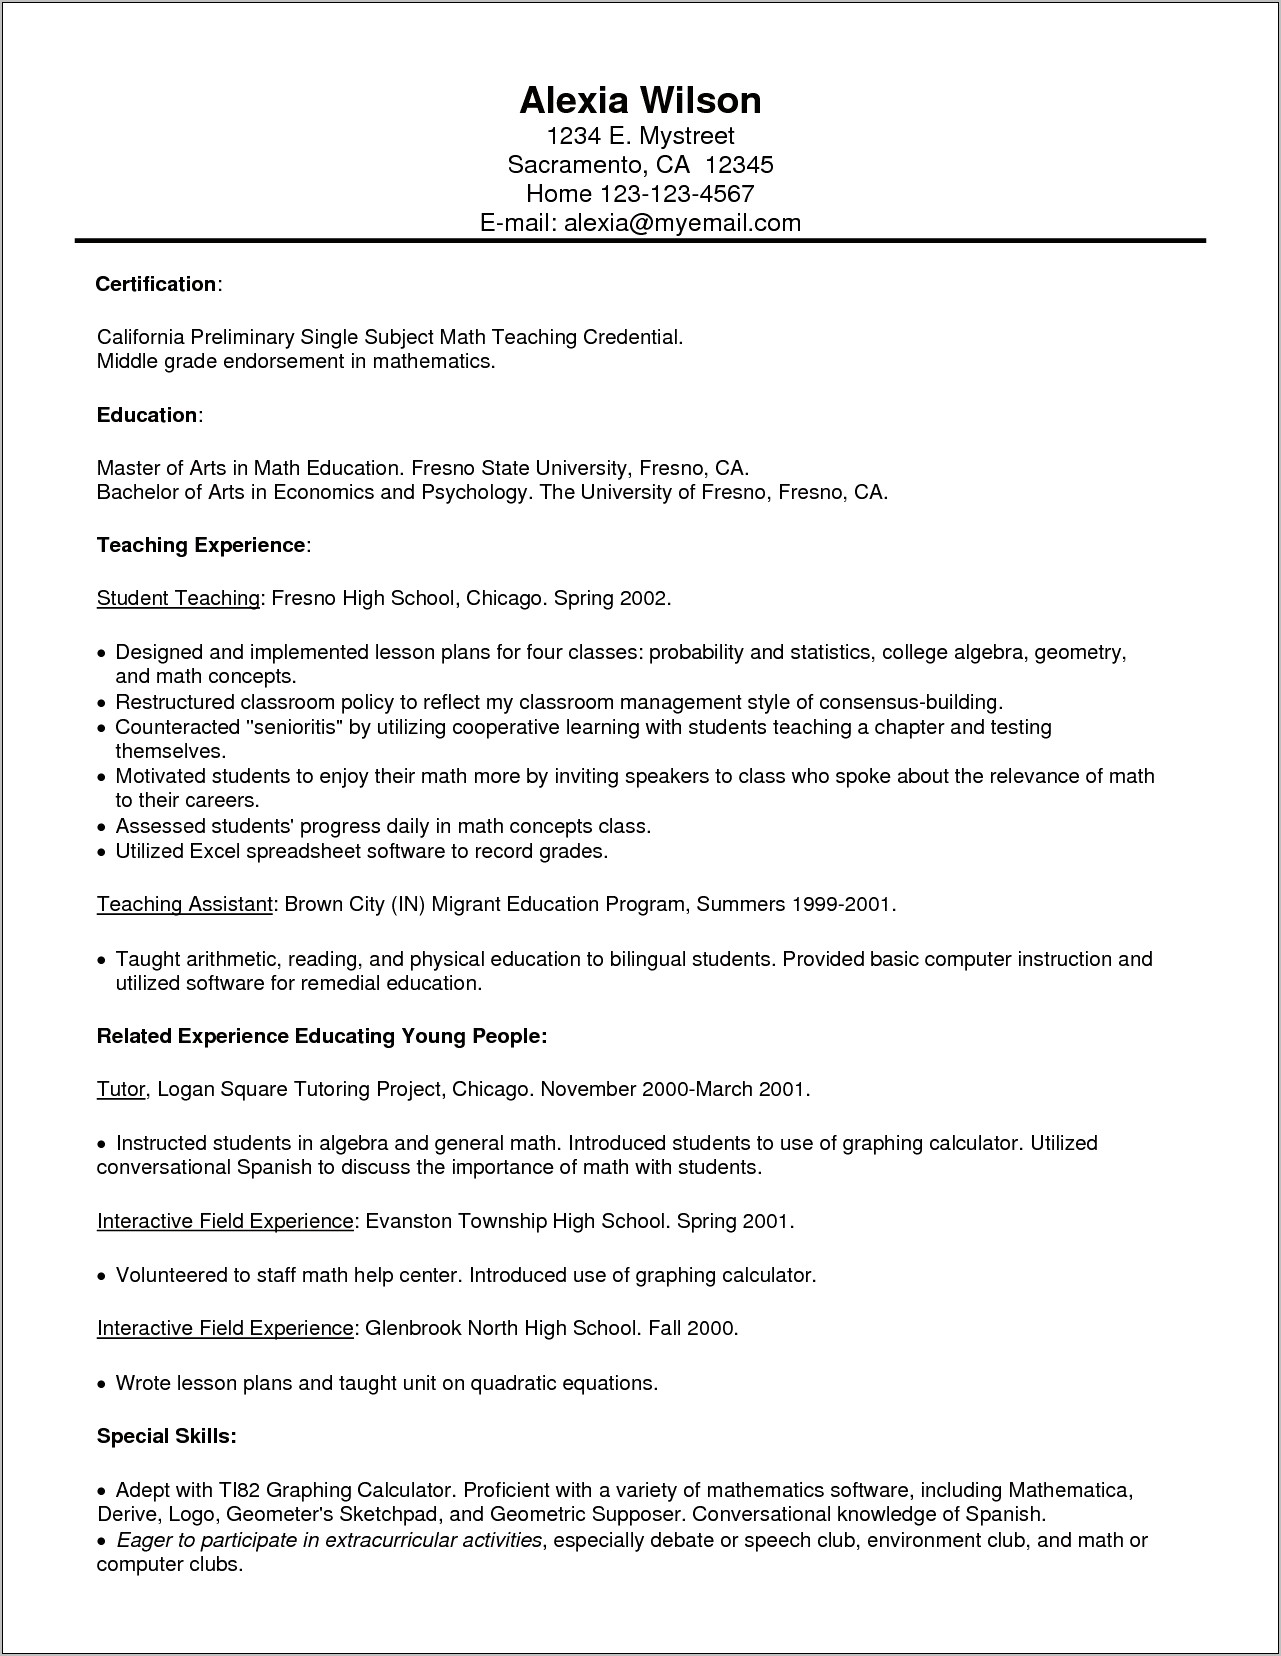 Related Skills For Math Major In Resume